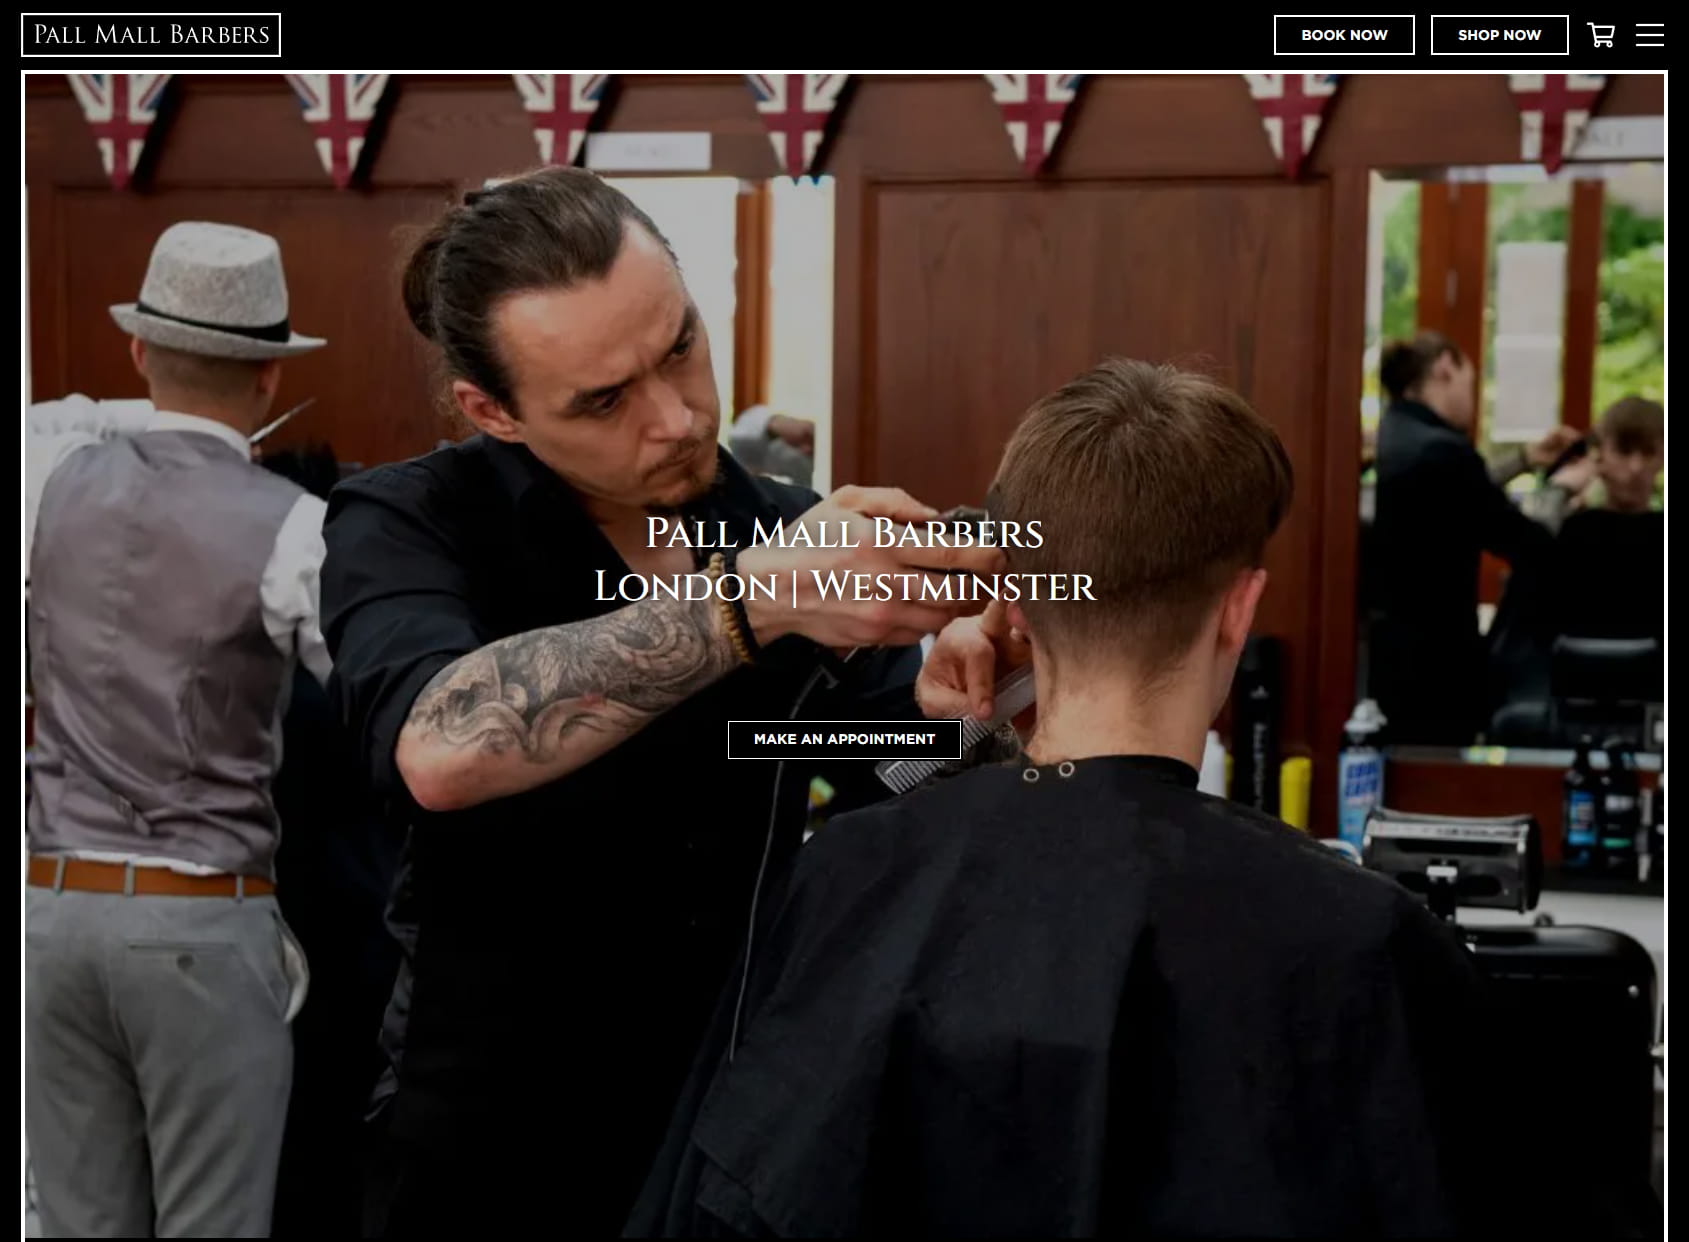 Pall Mall Barbers London | Westminster